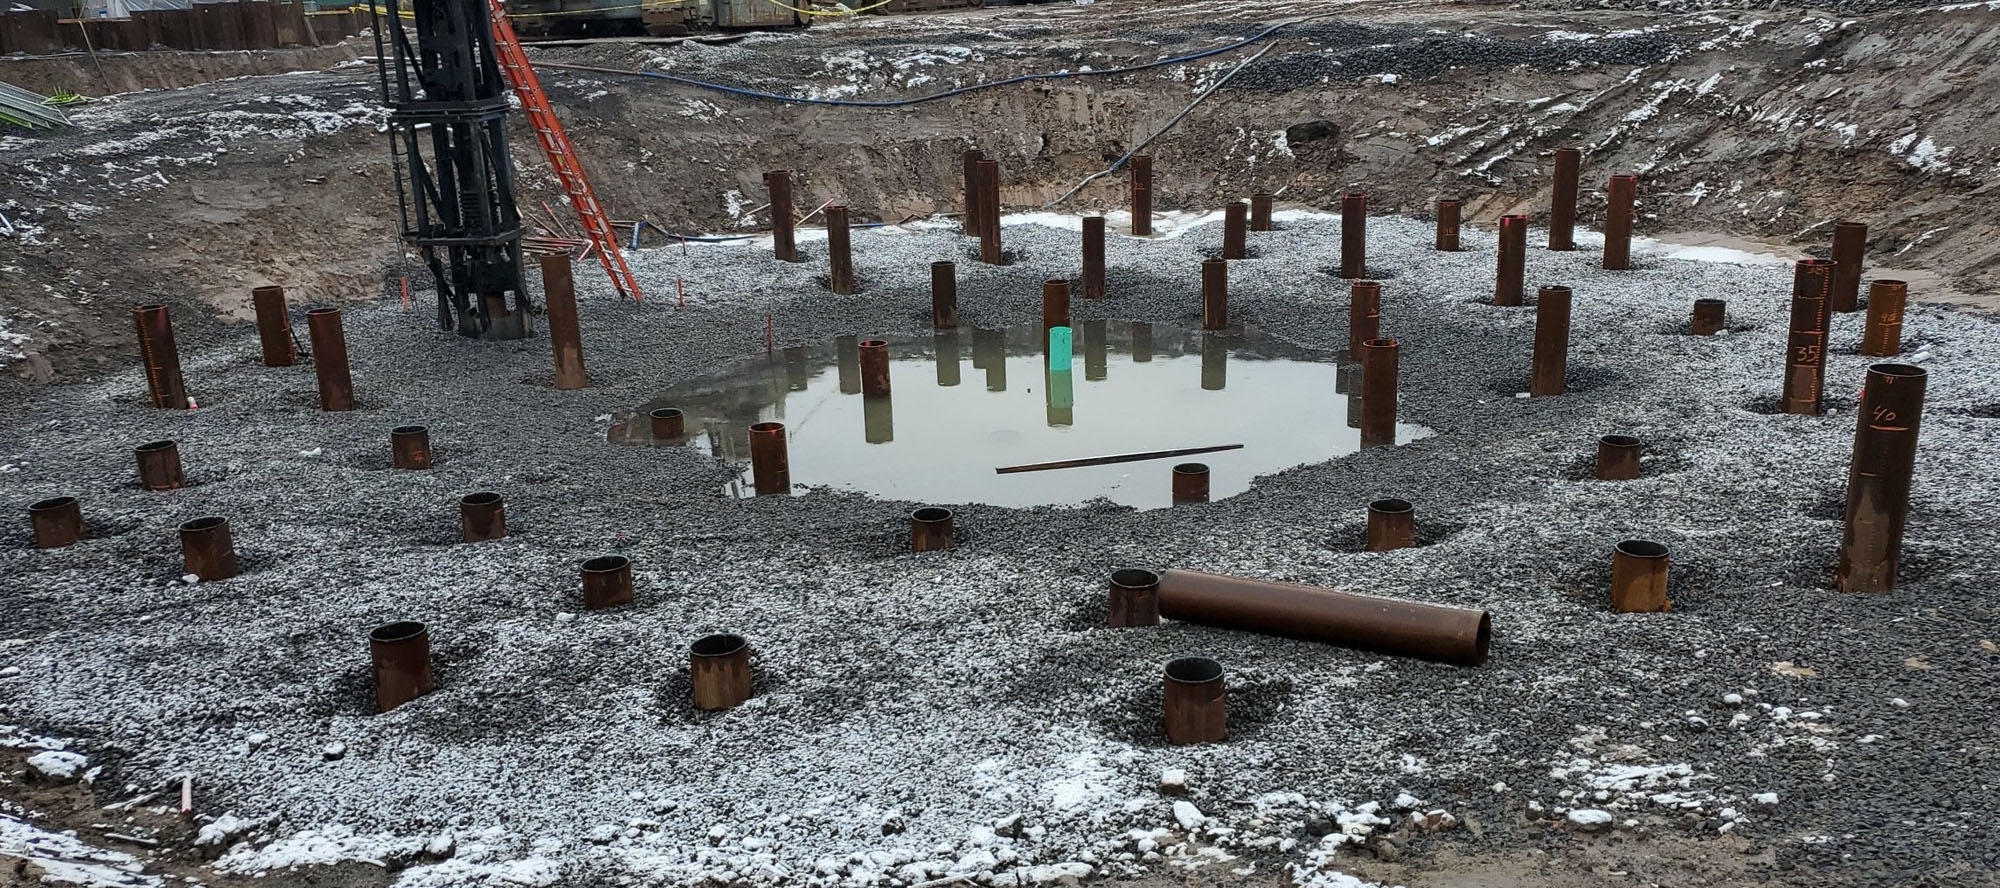 Piles that will Support the New Anaerobic Digesters - November 2021